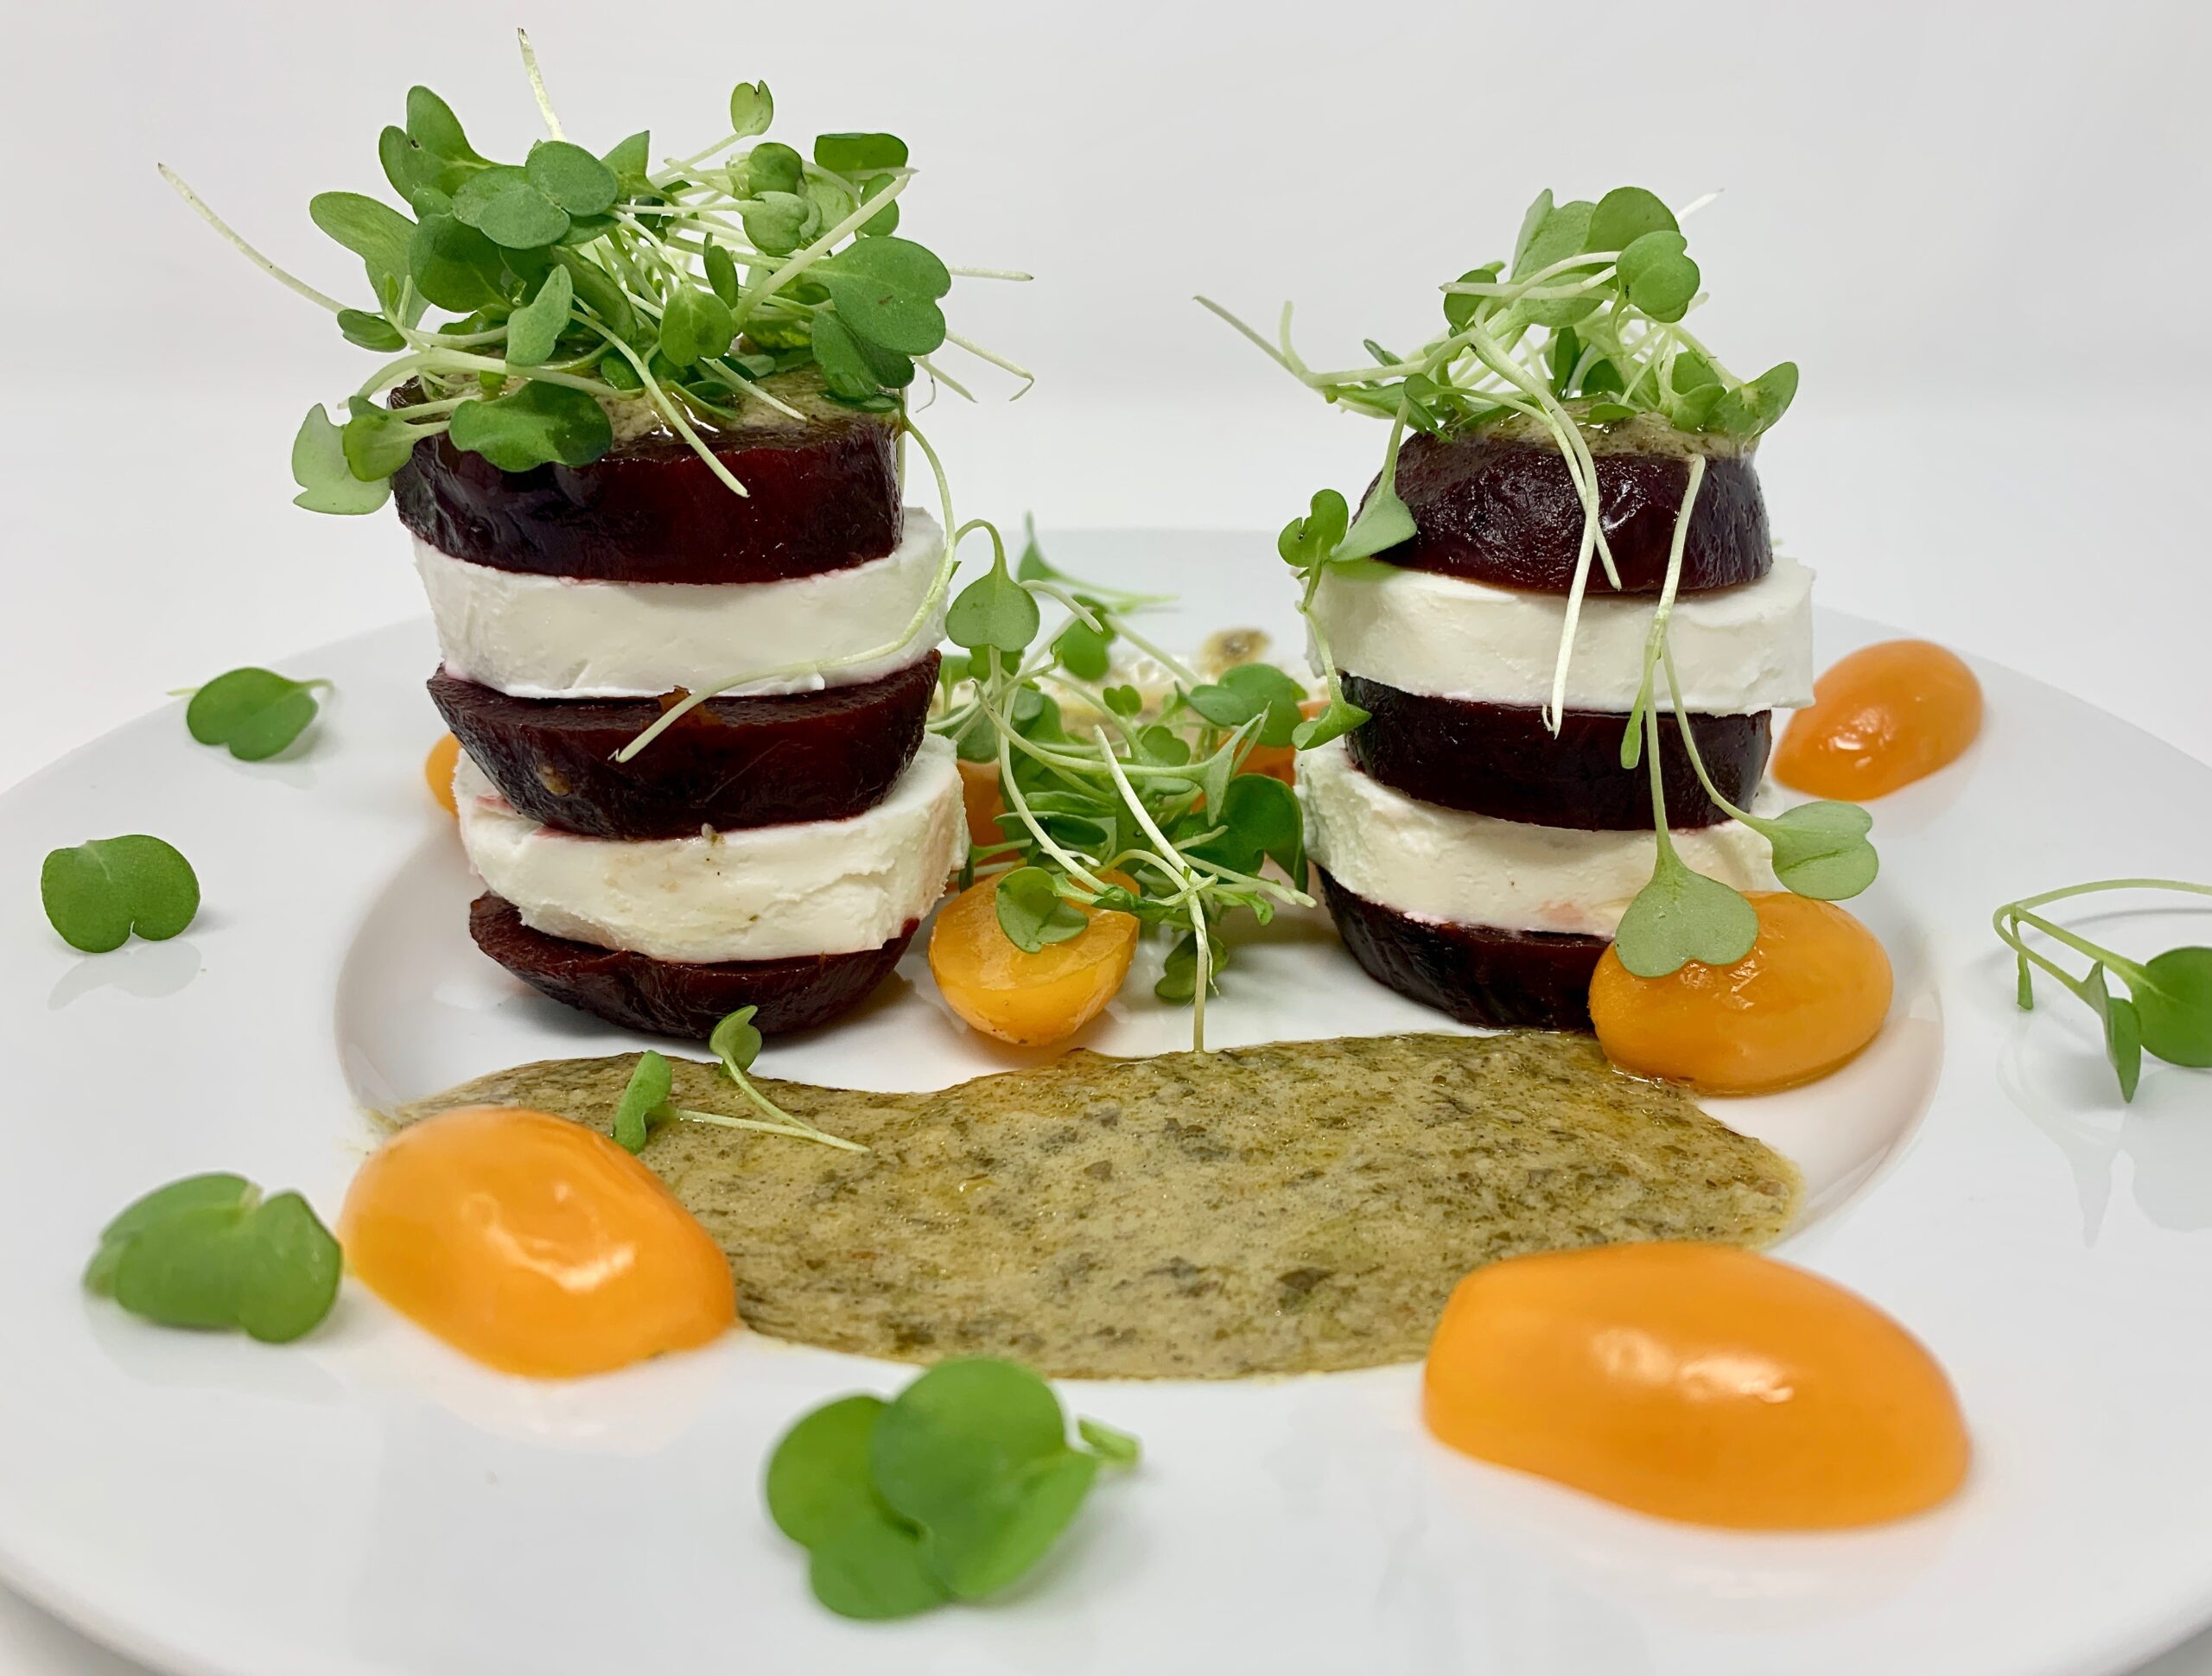 Beet Goat cheese towers